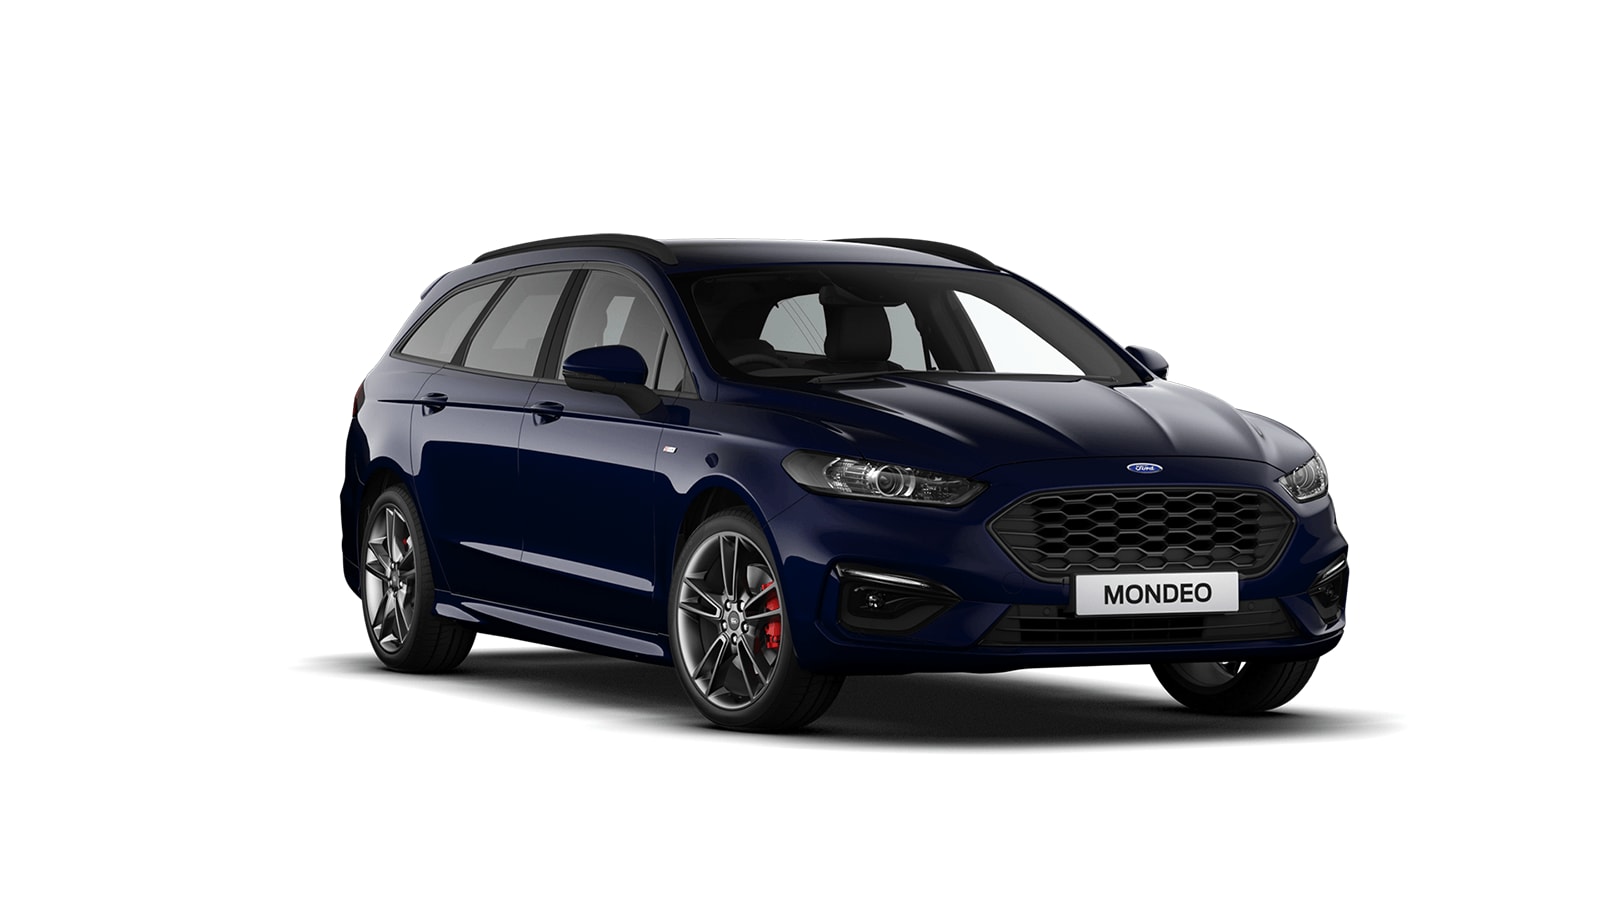 Ford Mondeo ST-Line Edition 2.0L EcoBlue 150PS at RGR Garages